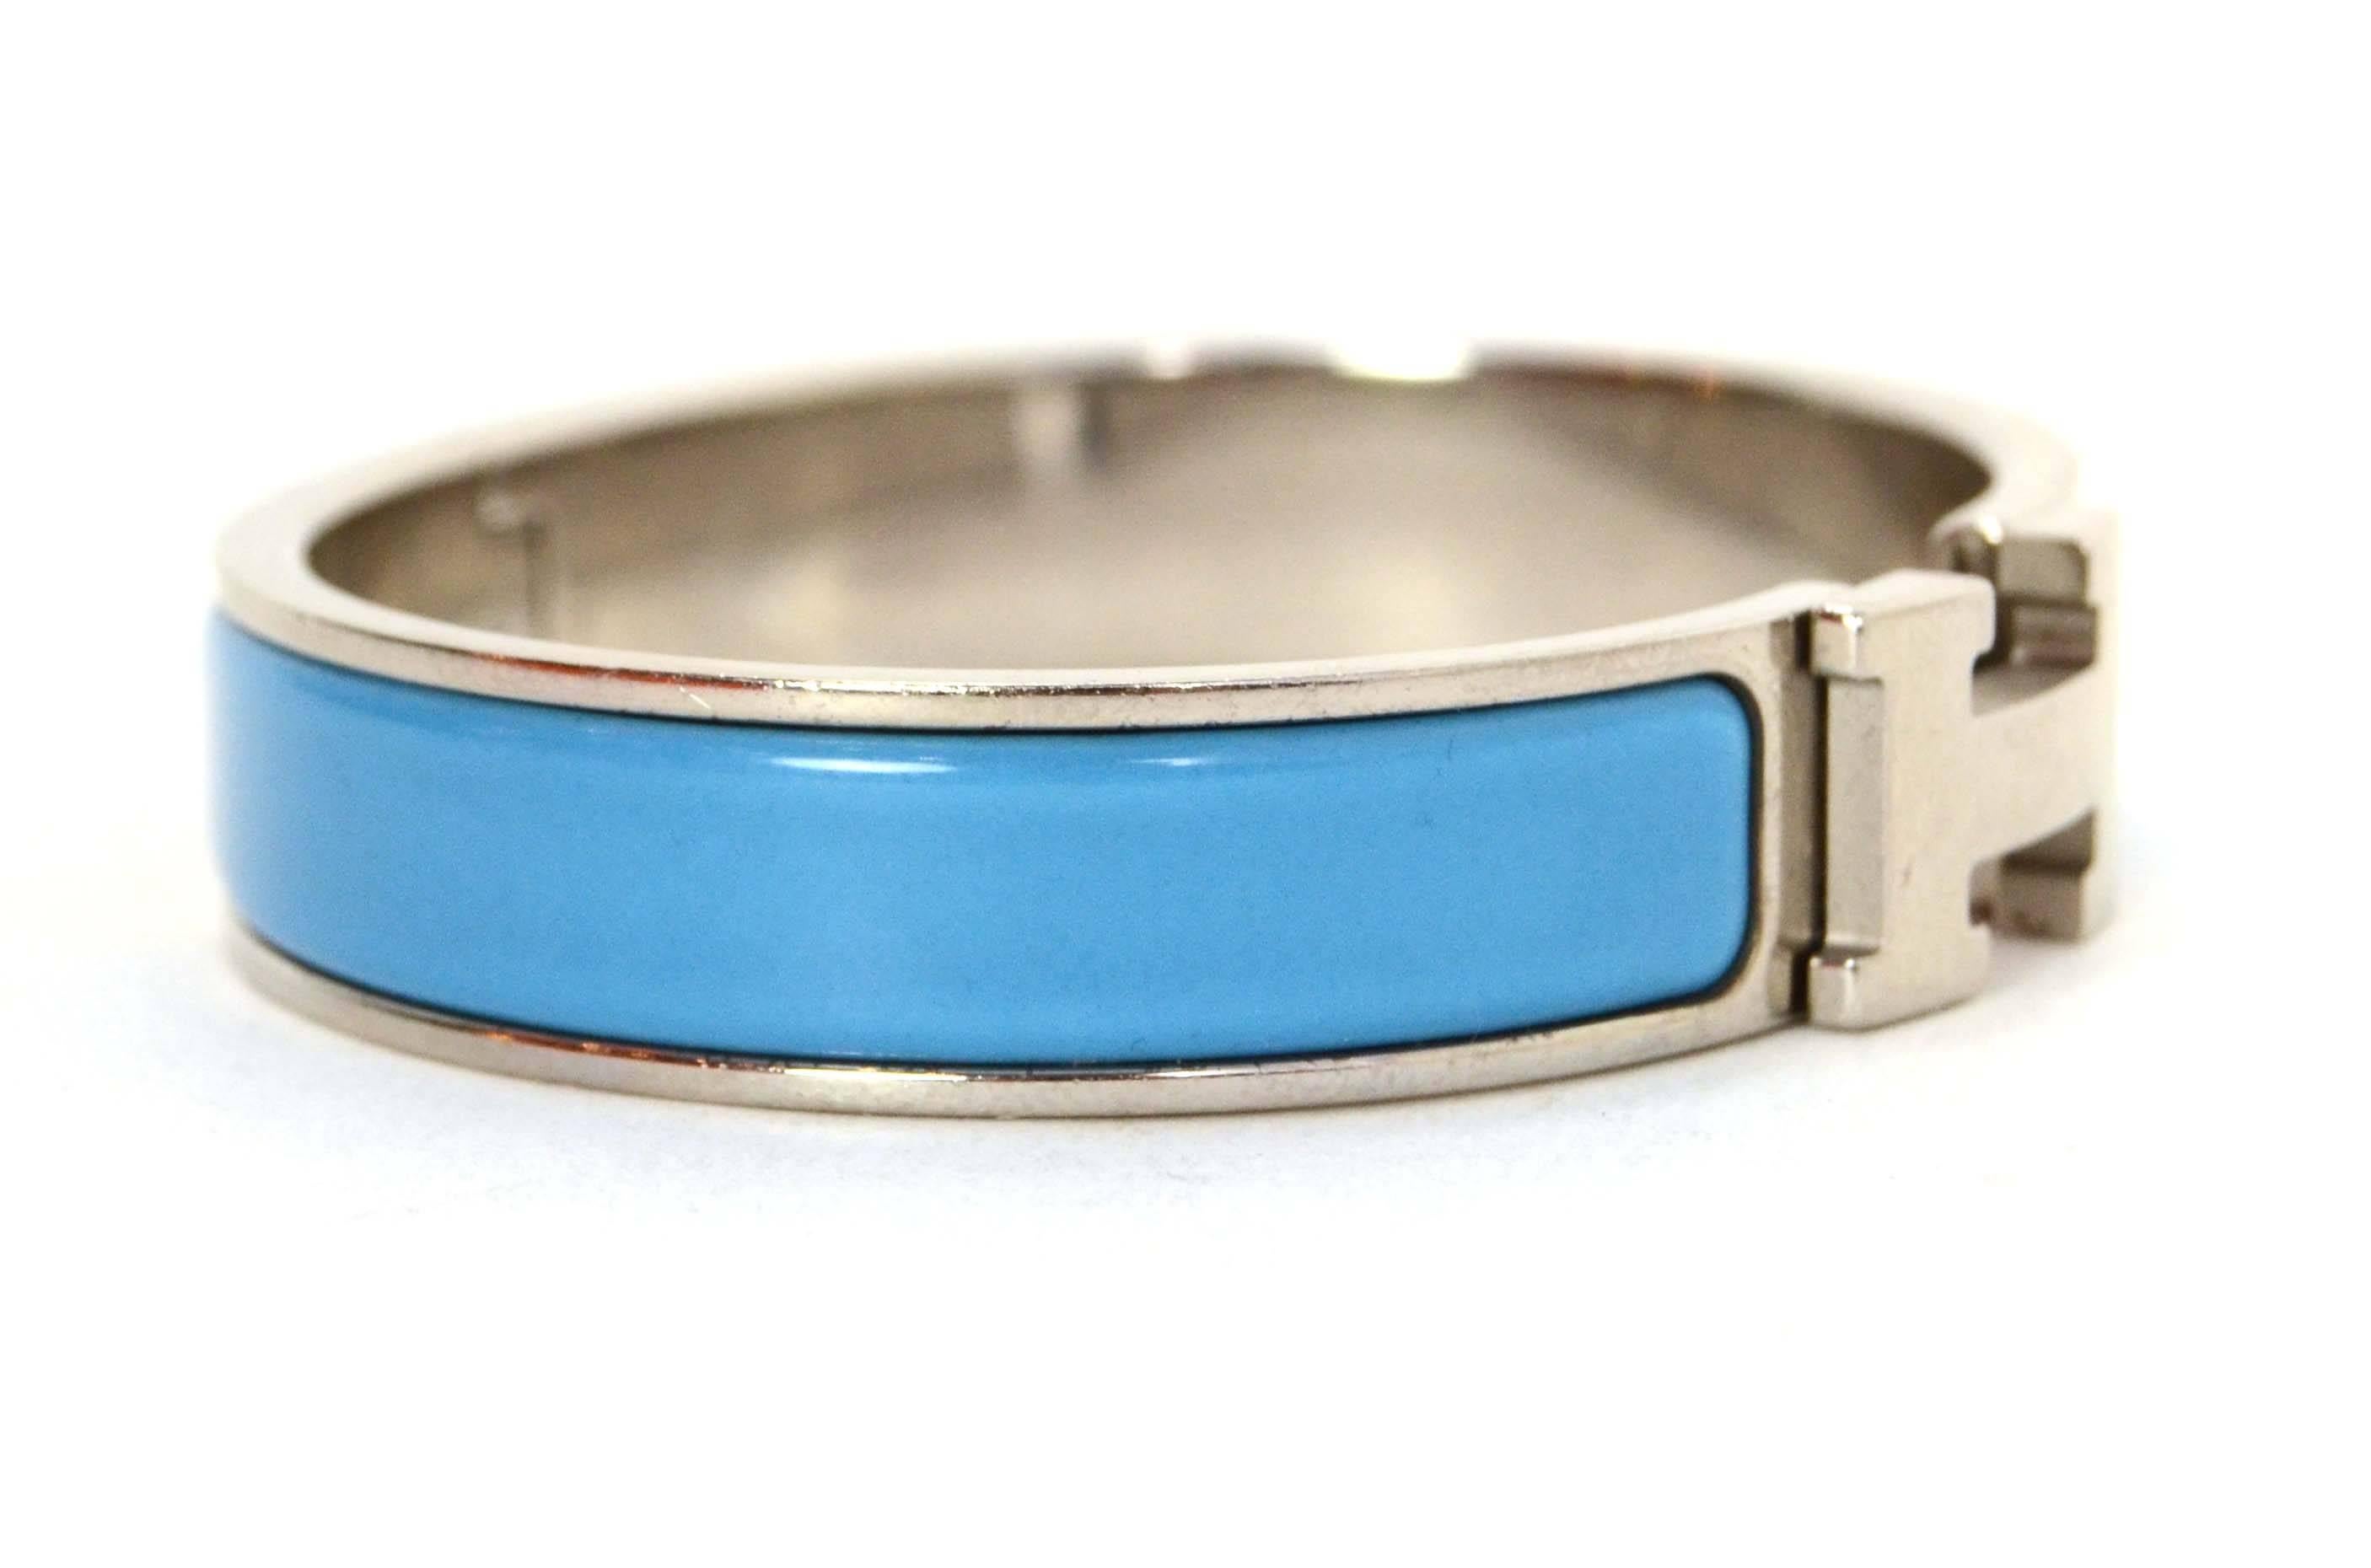 Hermes Narrow Turquoise Enamel H Clic Clac Bangle
-Made In: France
-Color: Turquoise and silvertone
-Materials: Enamel and palladium
-Closure: Hinge with H swivel to secure closure
-Stamp: Hermes 0 Made in France
-Overall Condition: Excellent